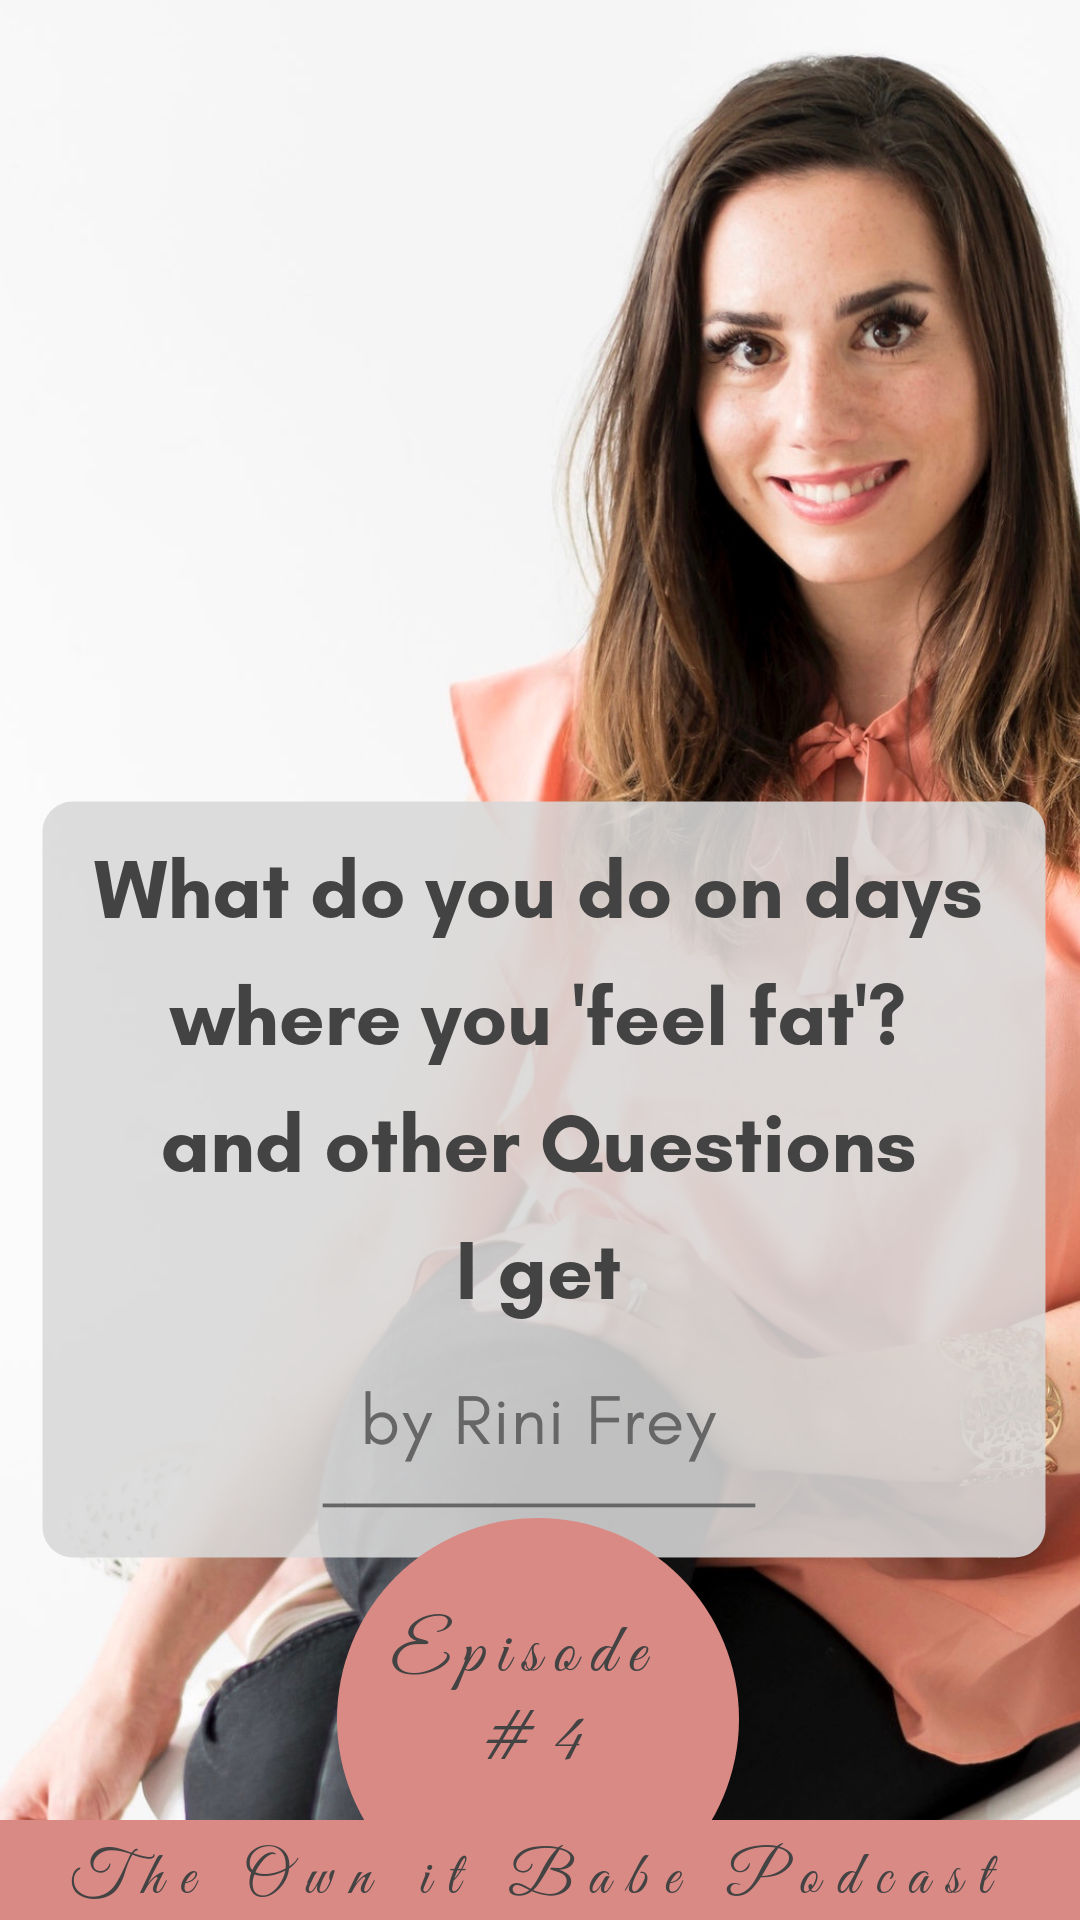 Podcast episode #4: What to do on days where you "feel fat" and other questions I get by Rini Frey - ownitbabe.ca - The Own it Babe Podcast #mentalhealth #bodypositivity #intuitiveeating 